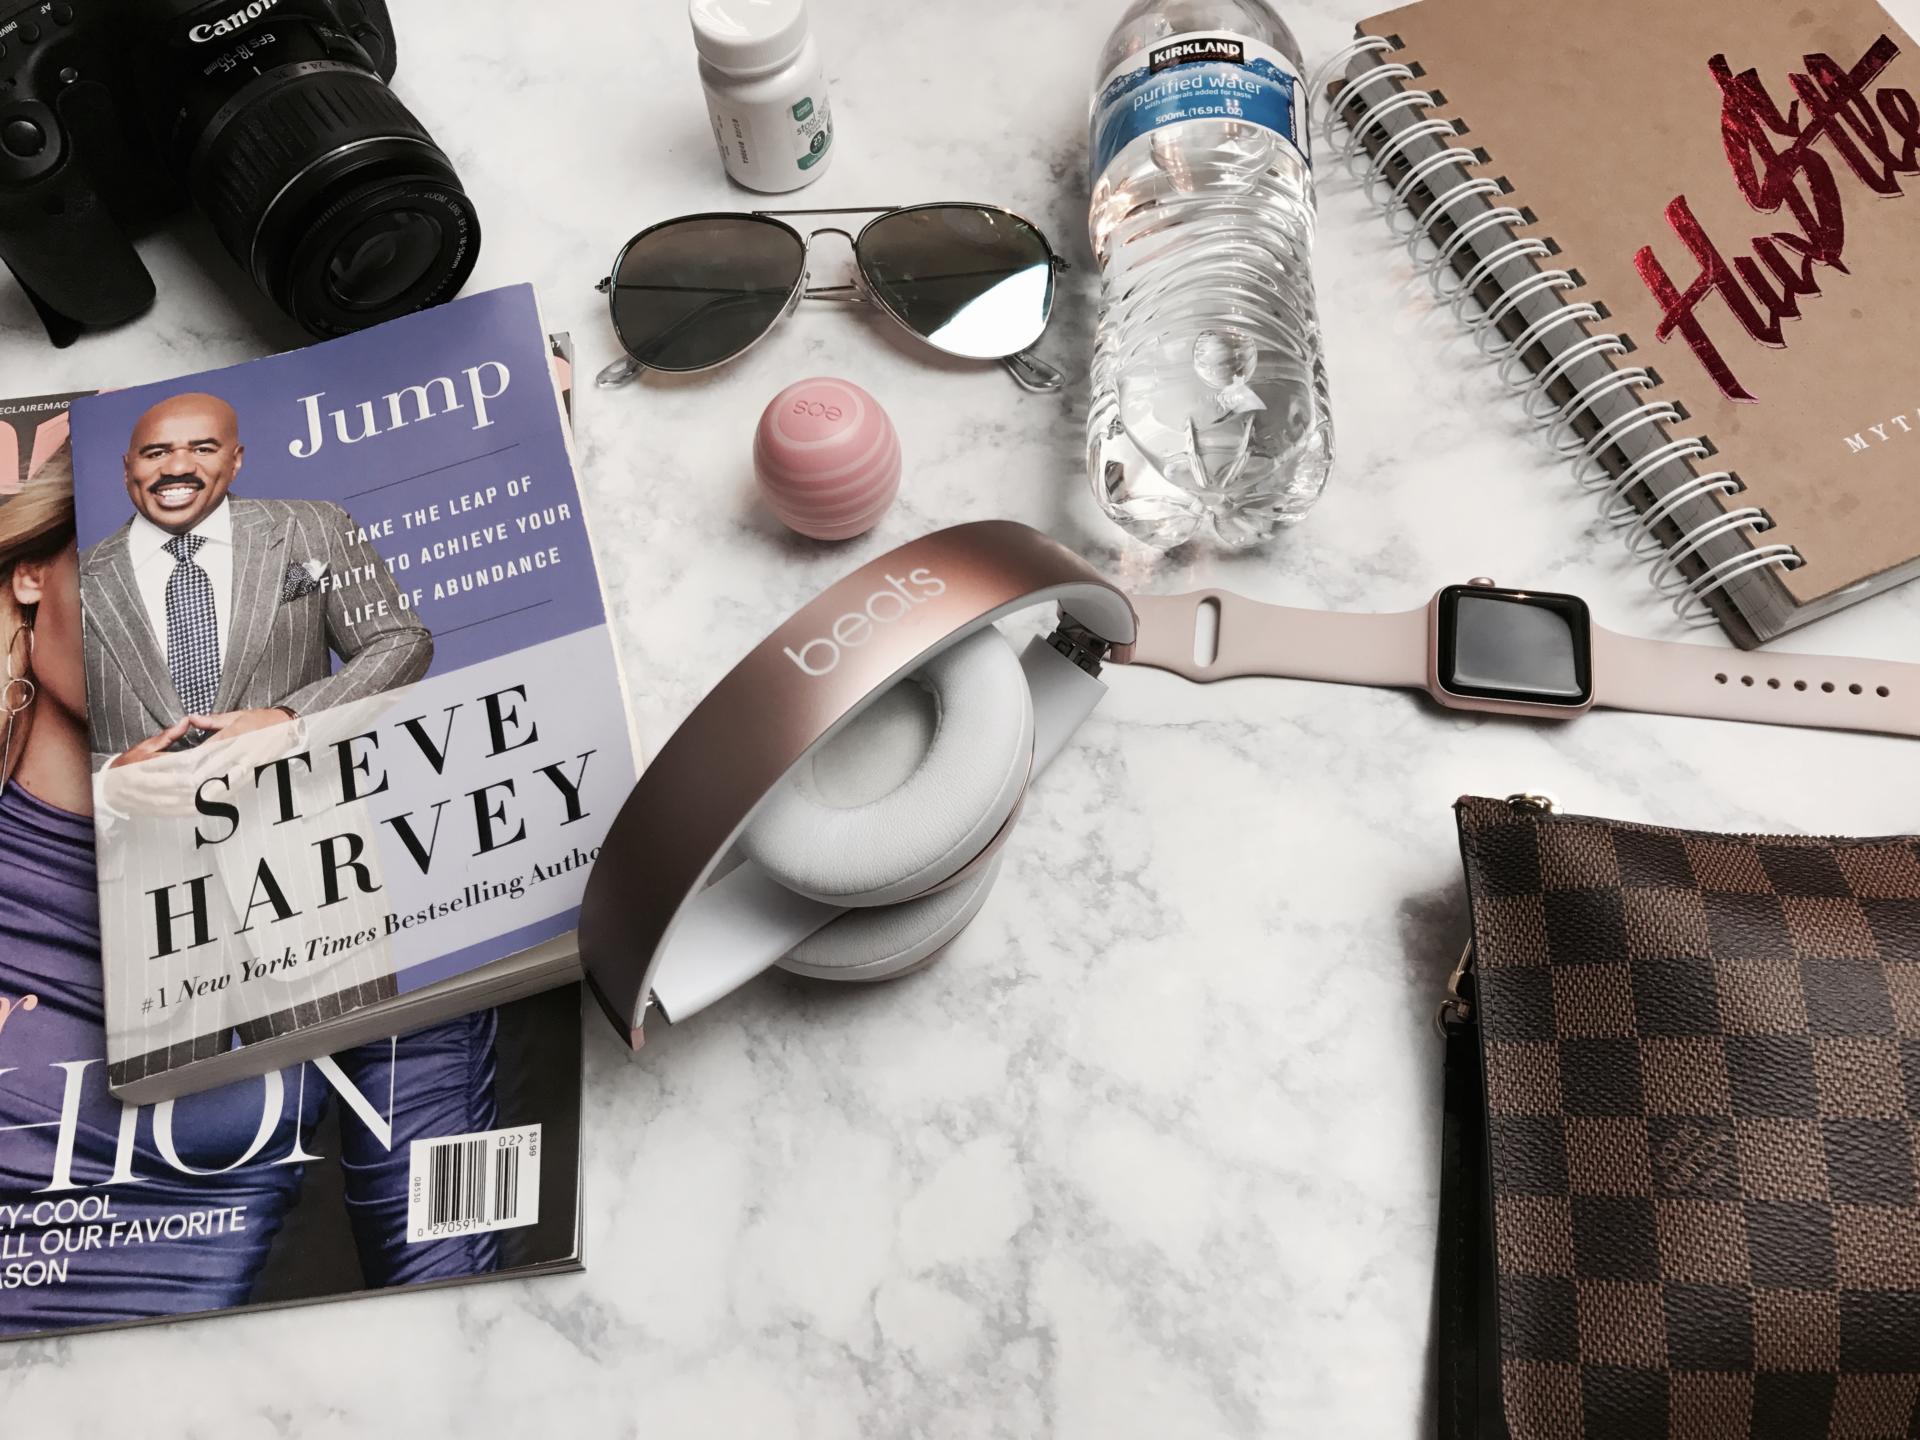 My Must-Have Travel Essentials When Traveling